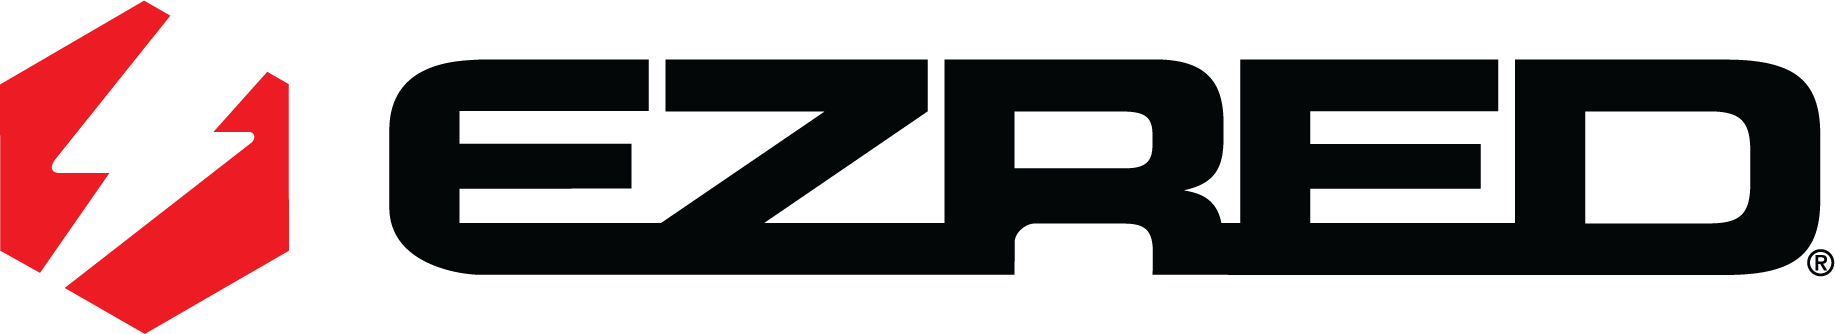 EZ Logo - Home. Getting the Job Done With EZRED Tools